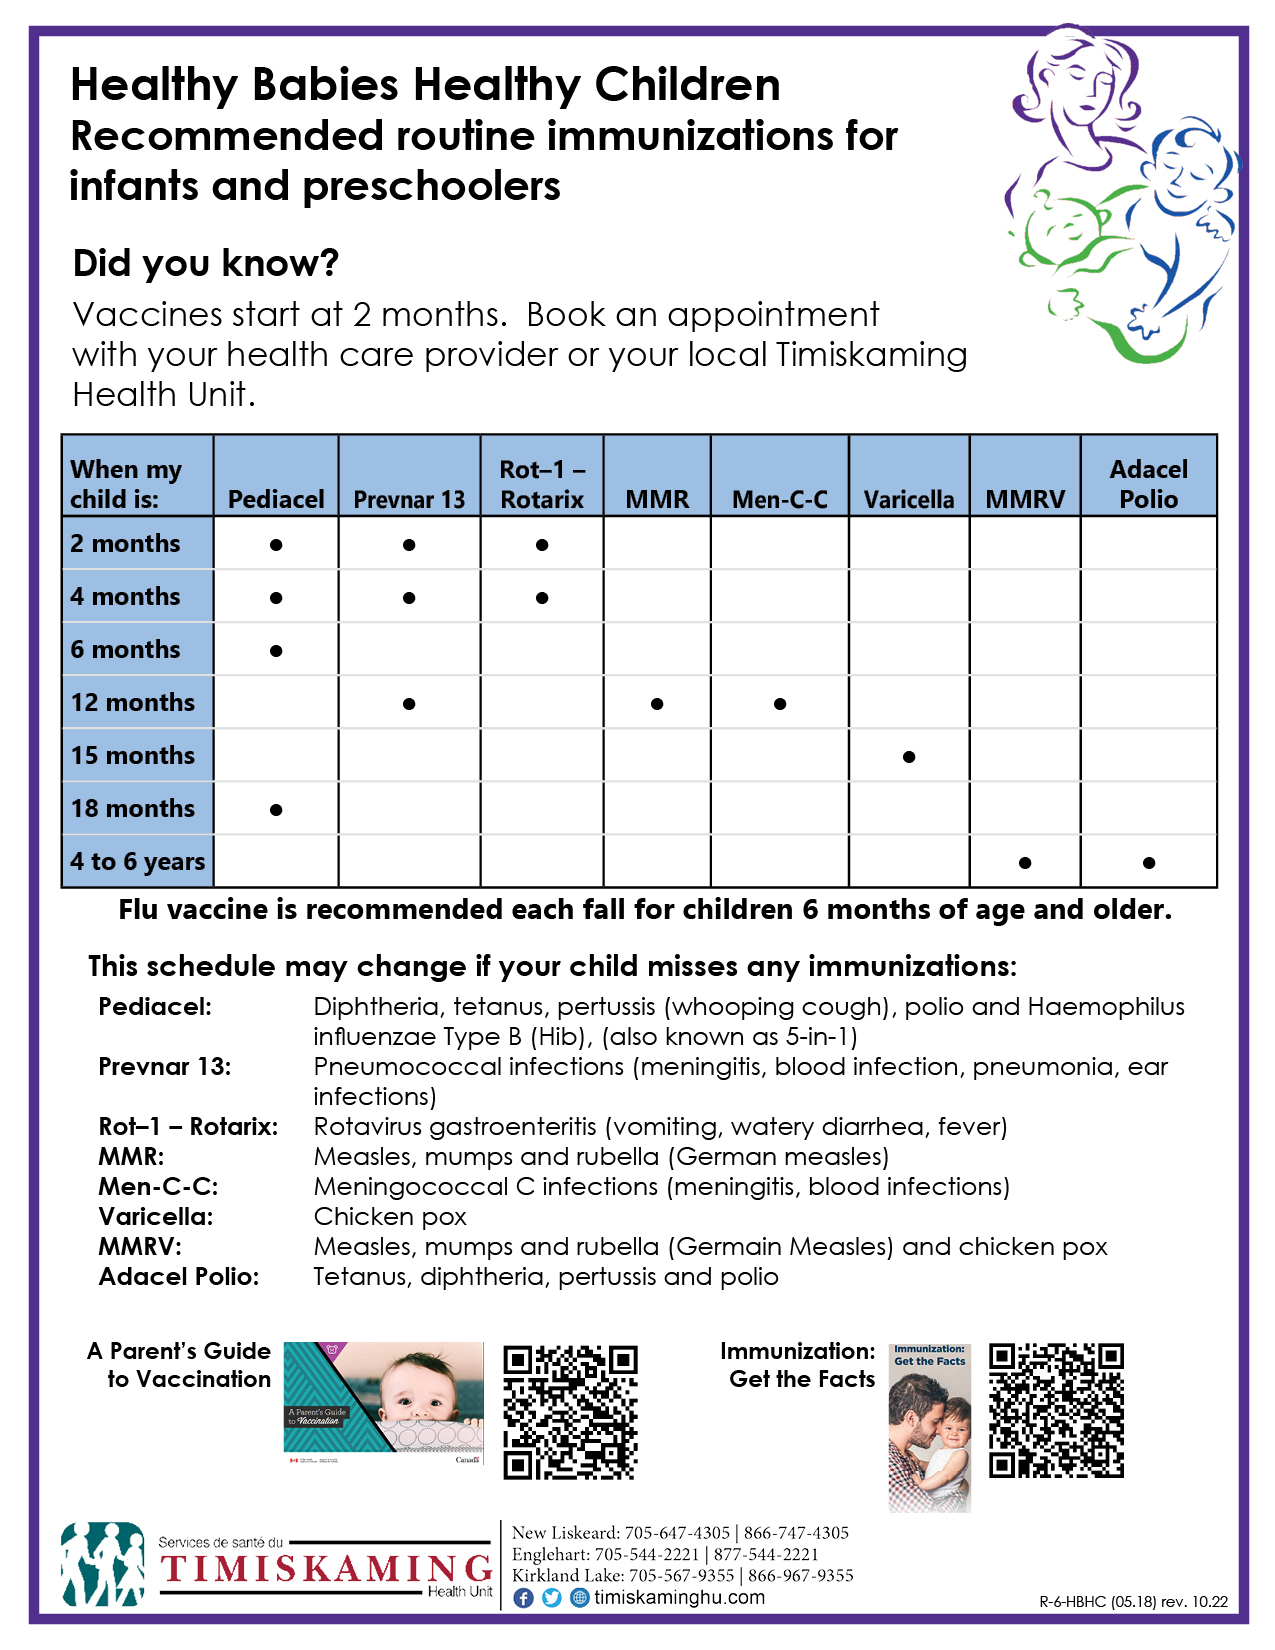 Recommended routine immunizations for infants and preschoolers